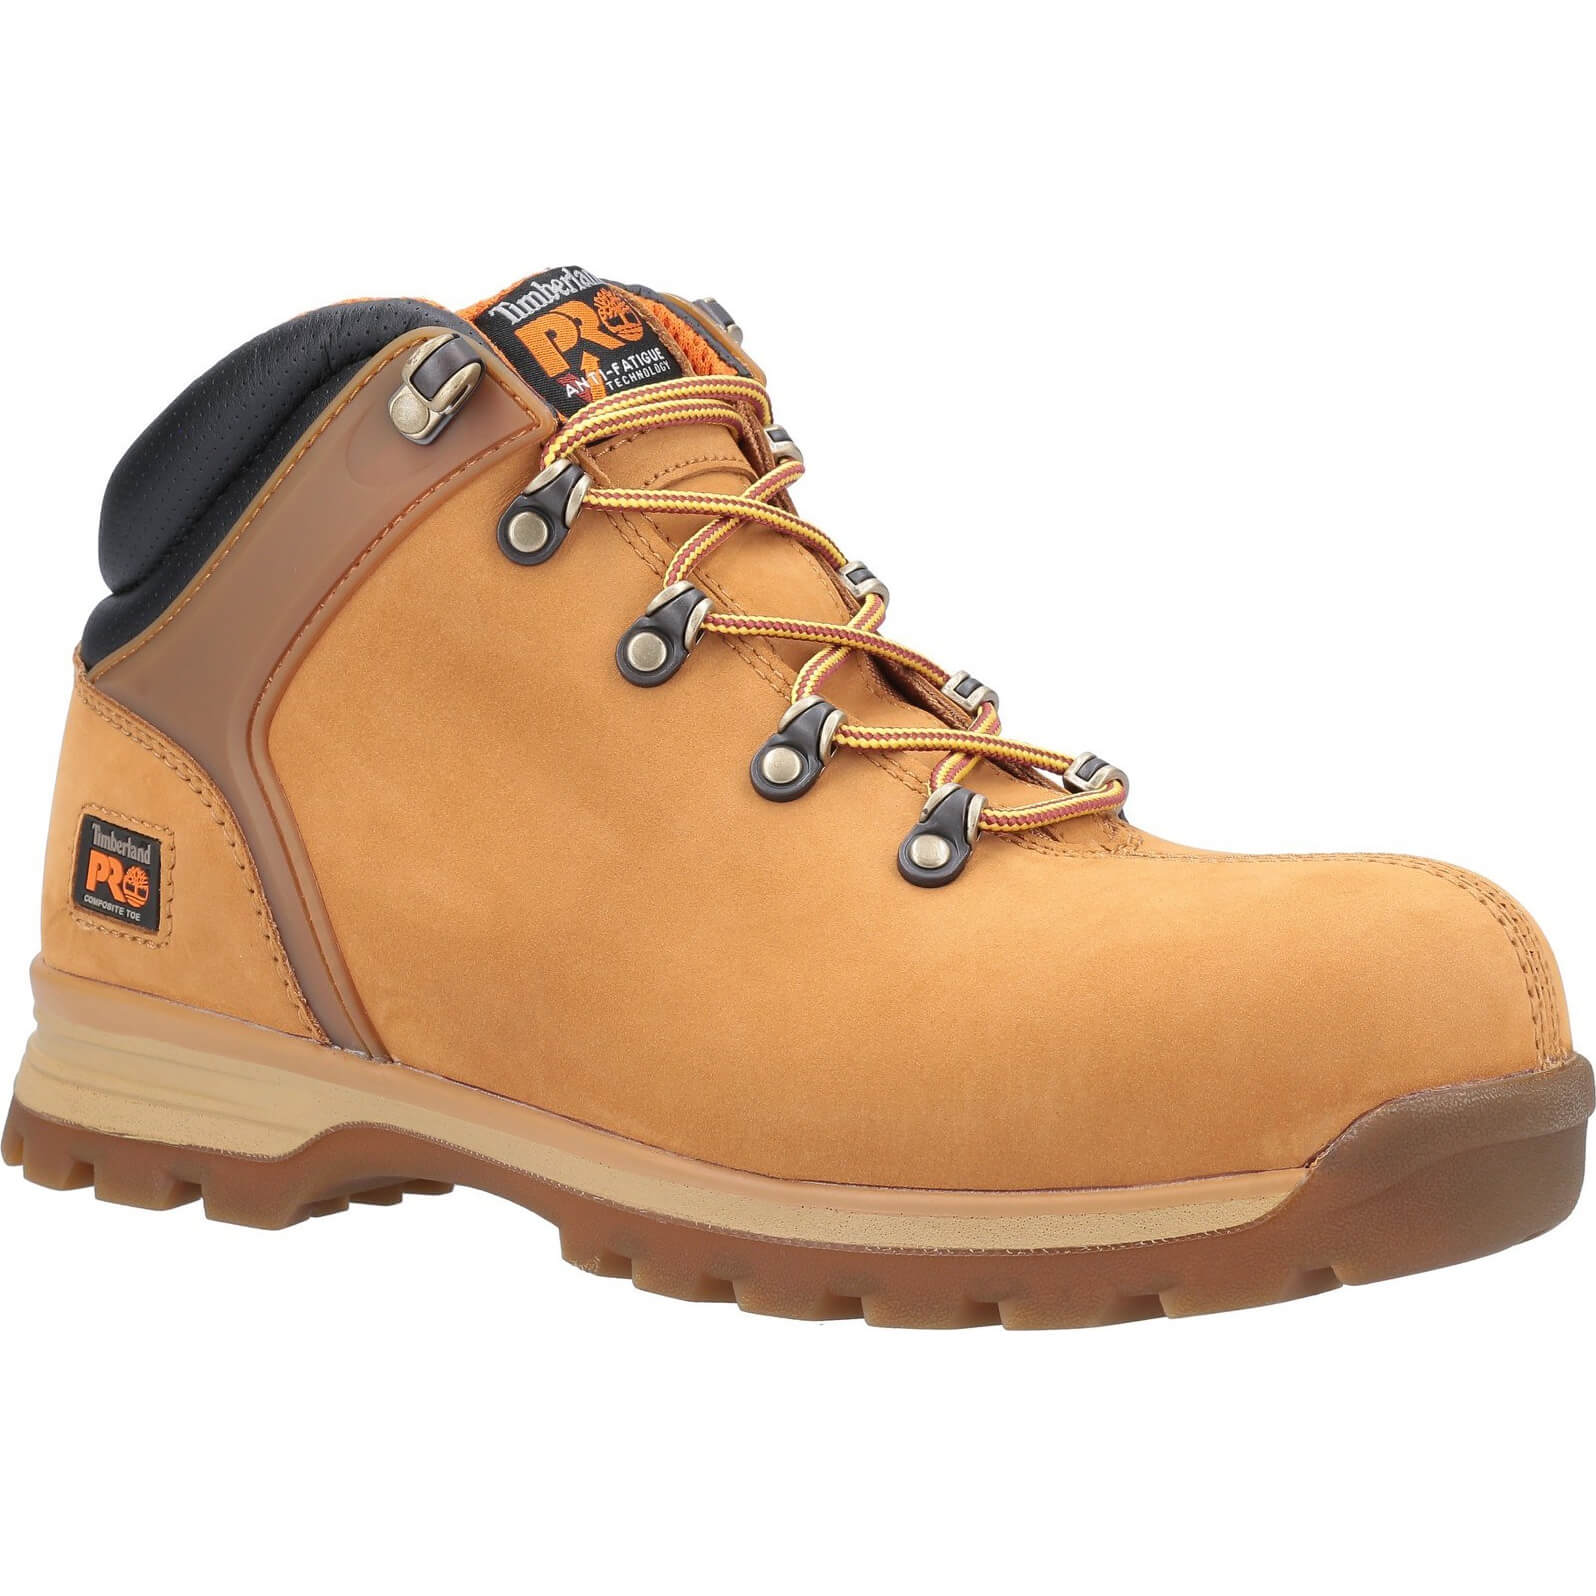 Image of Timberland Pro Splitrock XT Composite Safety Toe Work Boot Wheat Size 12